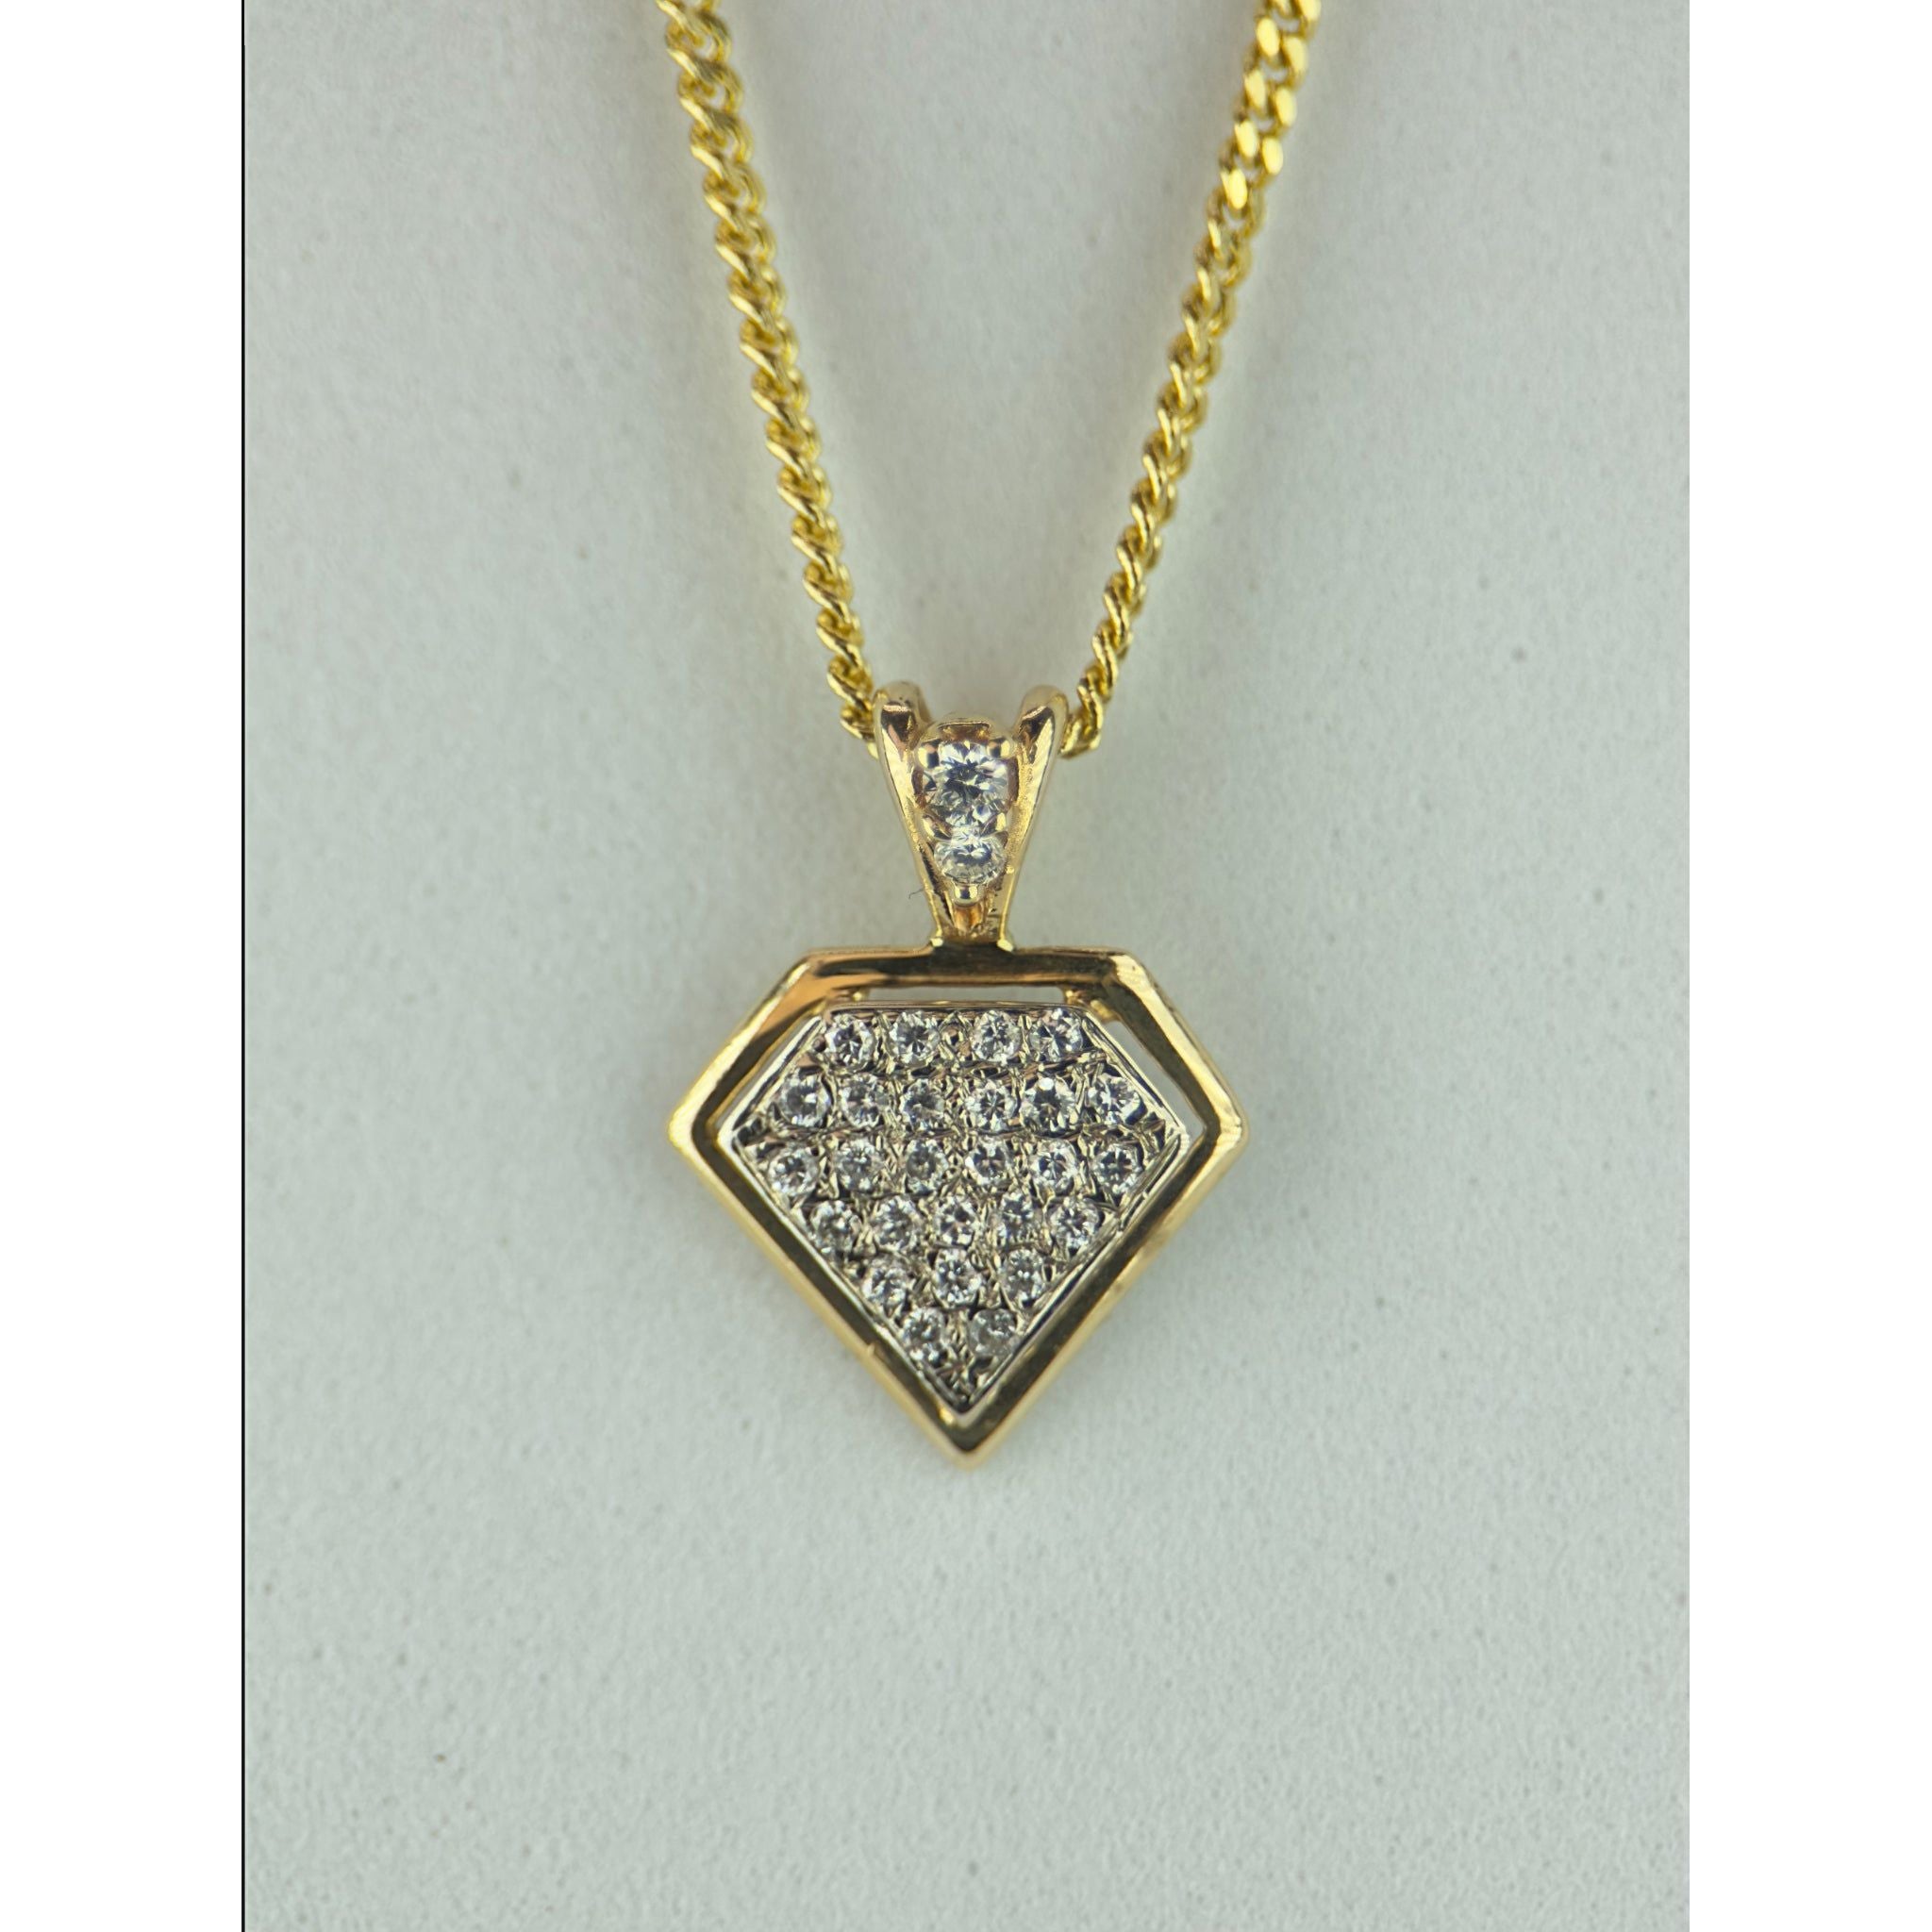 DR2215 - 14K Yellow Gold - Diamond - Pendant and Chain